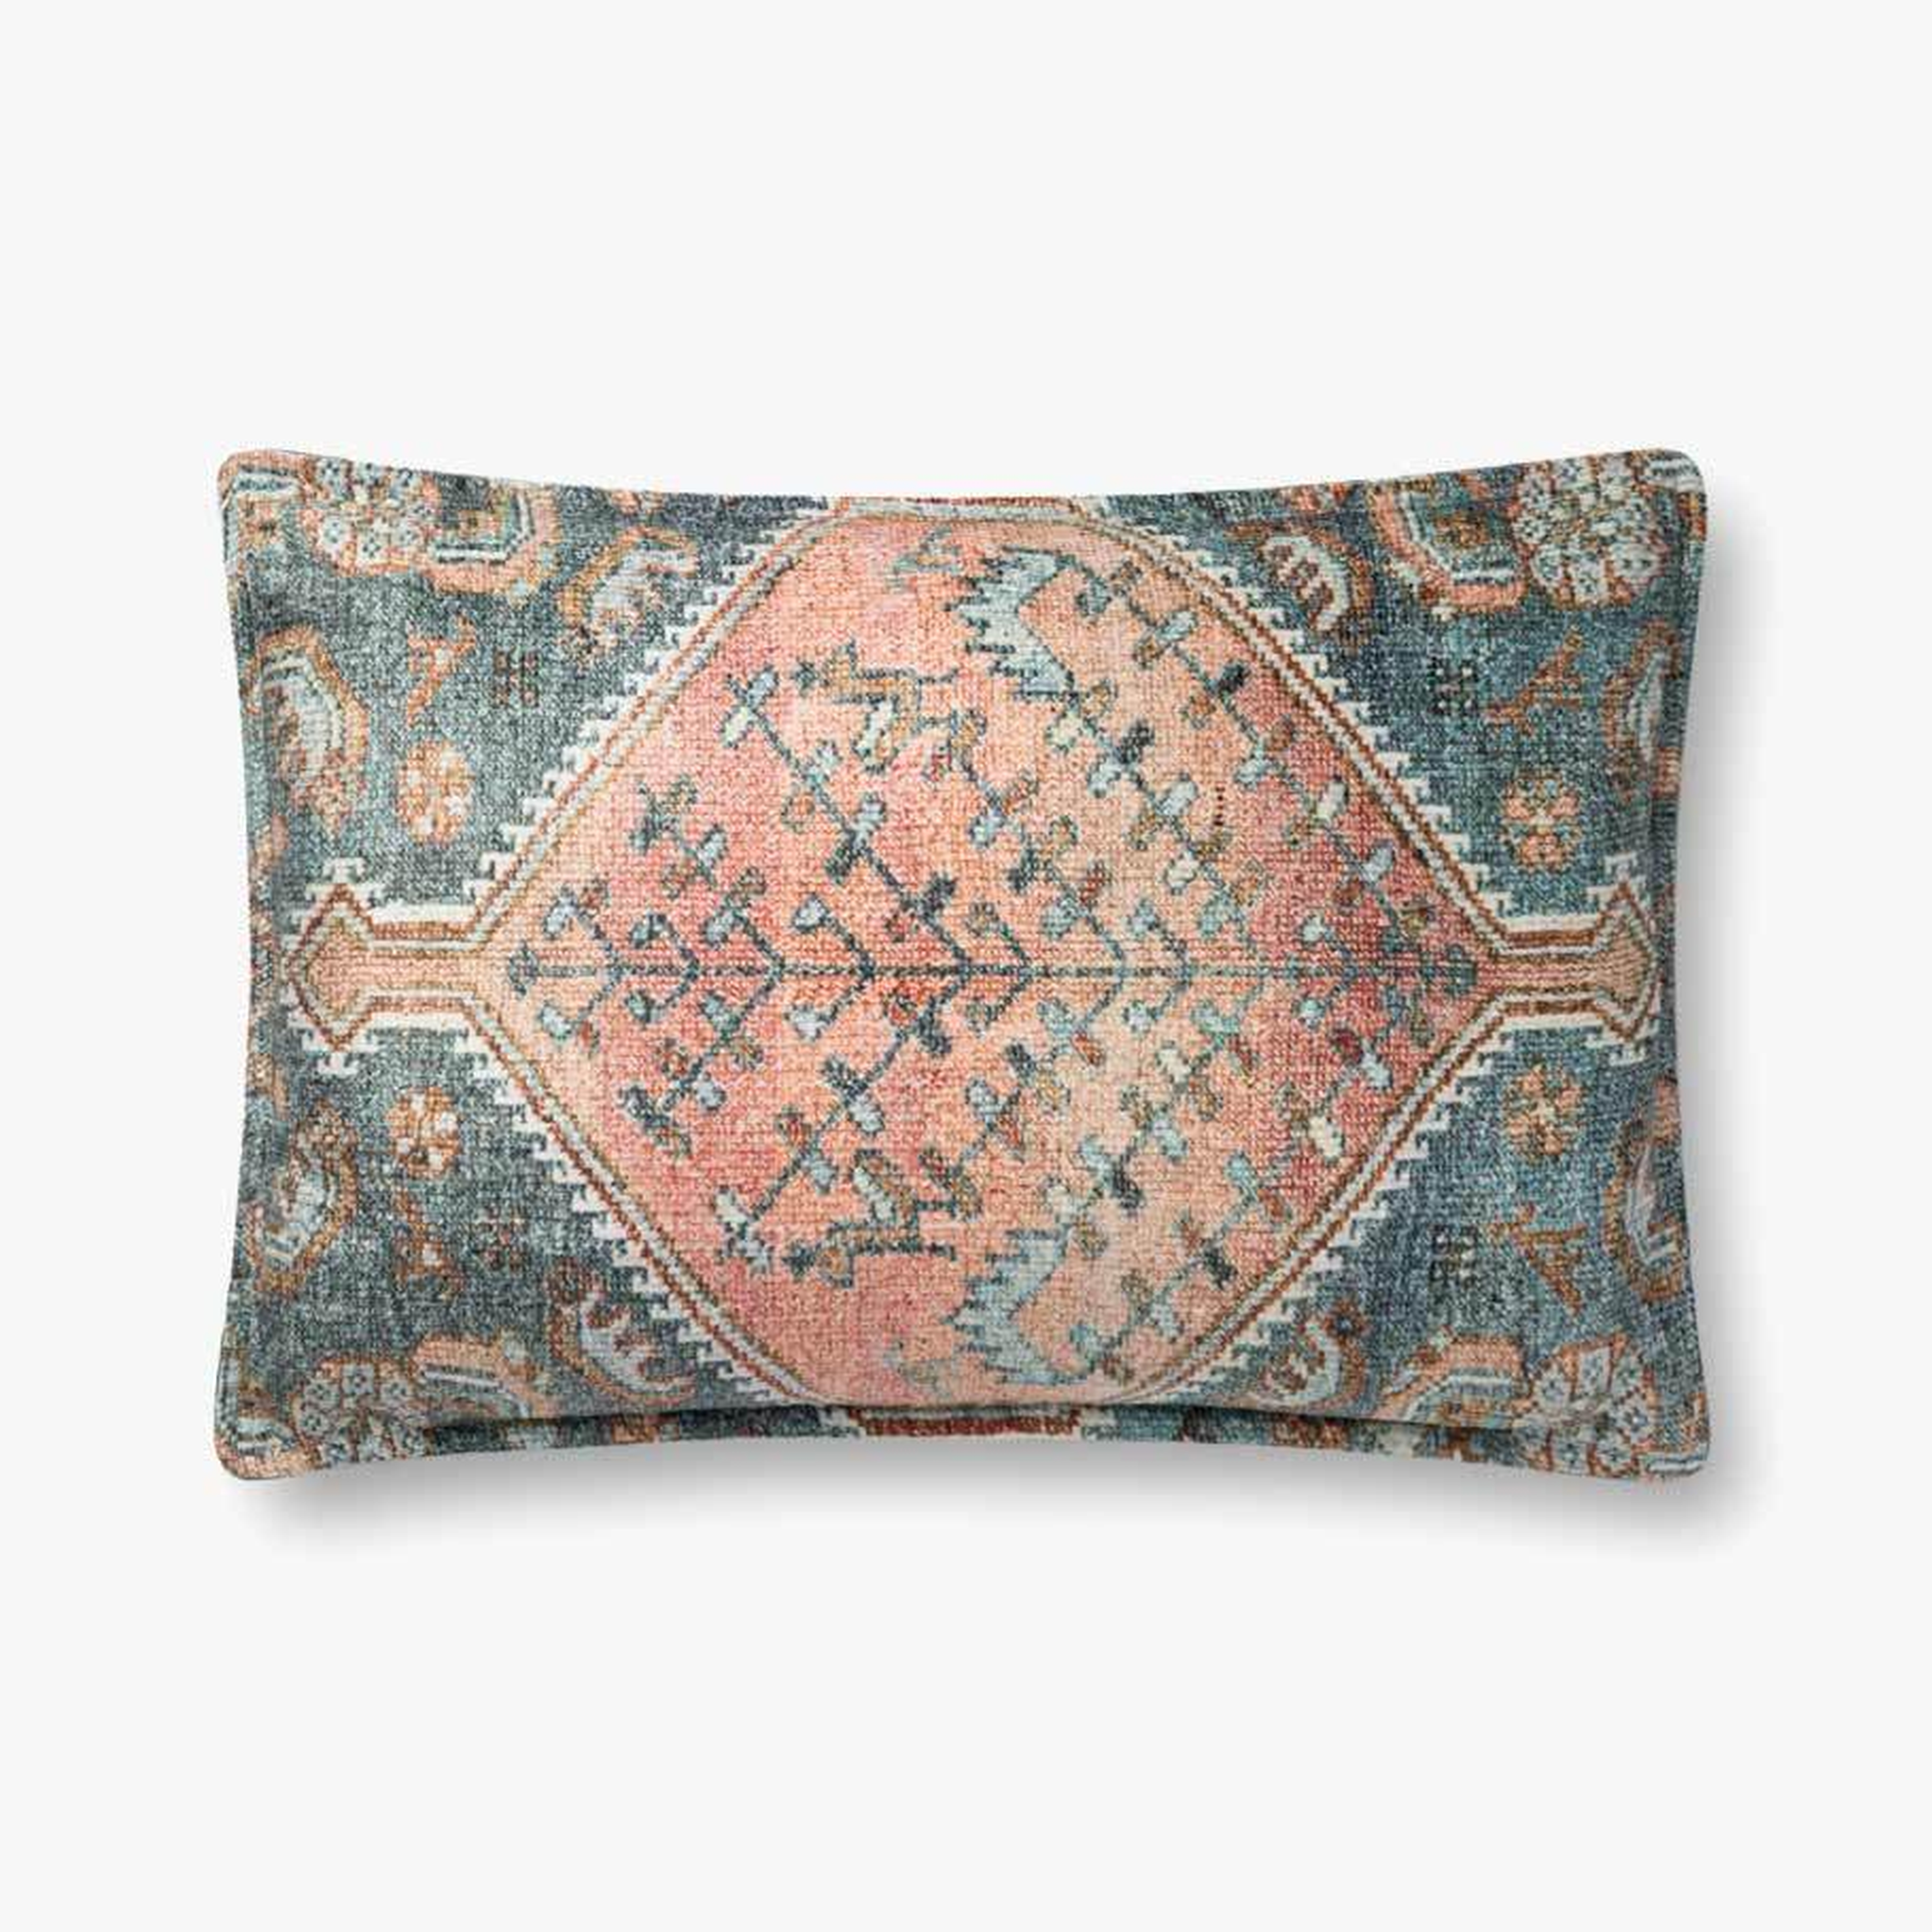 P0821 MULTI 16x26" PILLOW COVER WITH POLY INSERT - Loloi Rugs